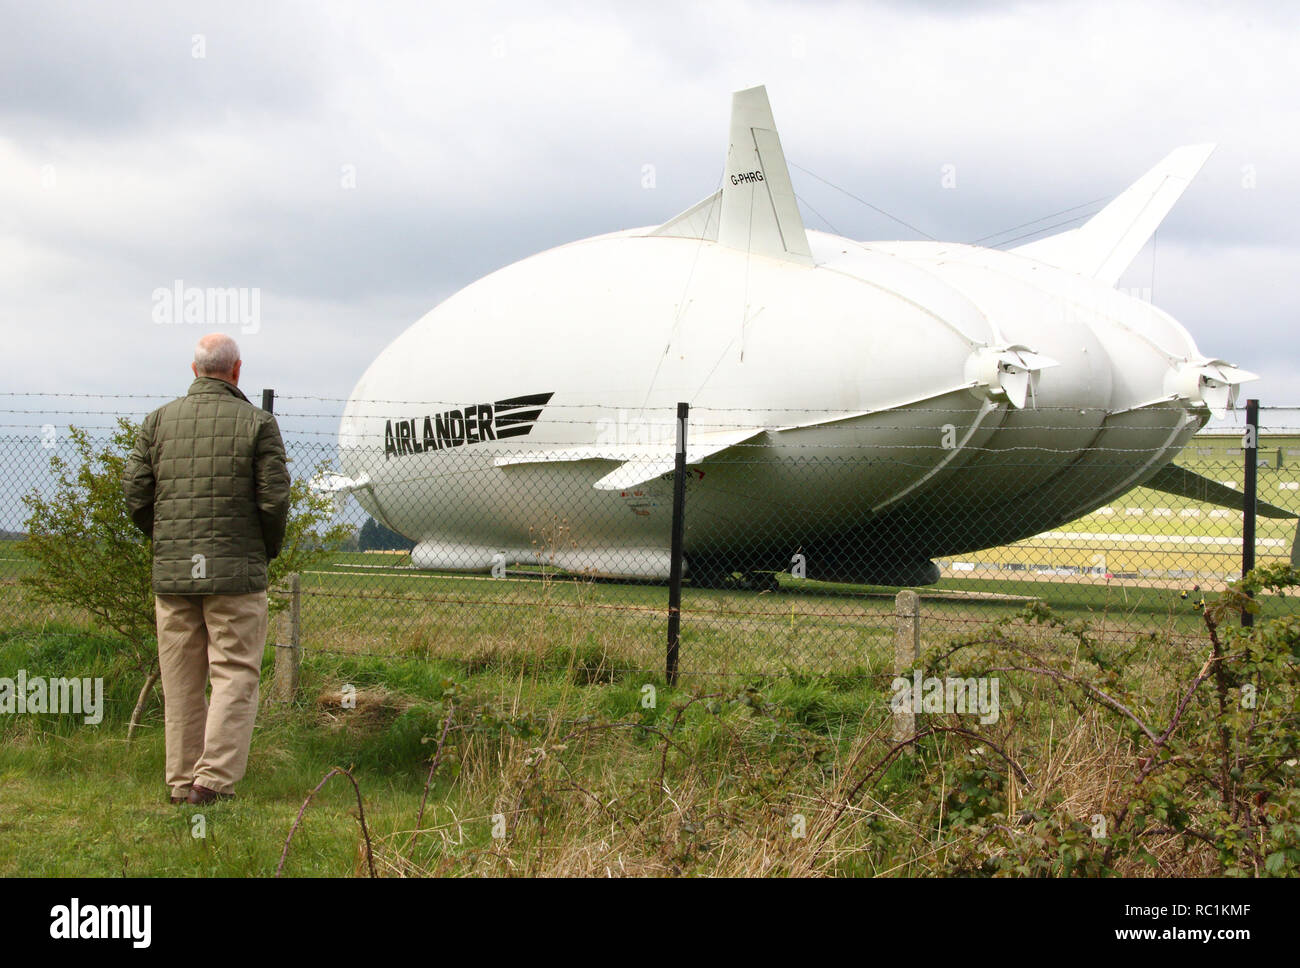 Cardington, UK. 14th Apr, 2017. View of the Airlander, the longest aircraft in the world.The Â£32m aircraft - nicknamed ''The Flying Bum'' was originally unveiled to the public at a naming ceremony by HRH The Duke of Kent in April 2016, but a few weeks later it crashed at the end of a test flight. At 92-metre long, the Airlander 10 is the longest aircraft in the world. The world's longest aircraft has been retired from service as developers prepare to start work on a new model. Credit: Keith Mayhew/SOPA Images/ZUMA Wire/Alamy Live News Stock Photo